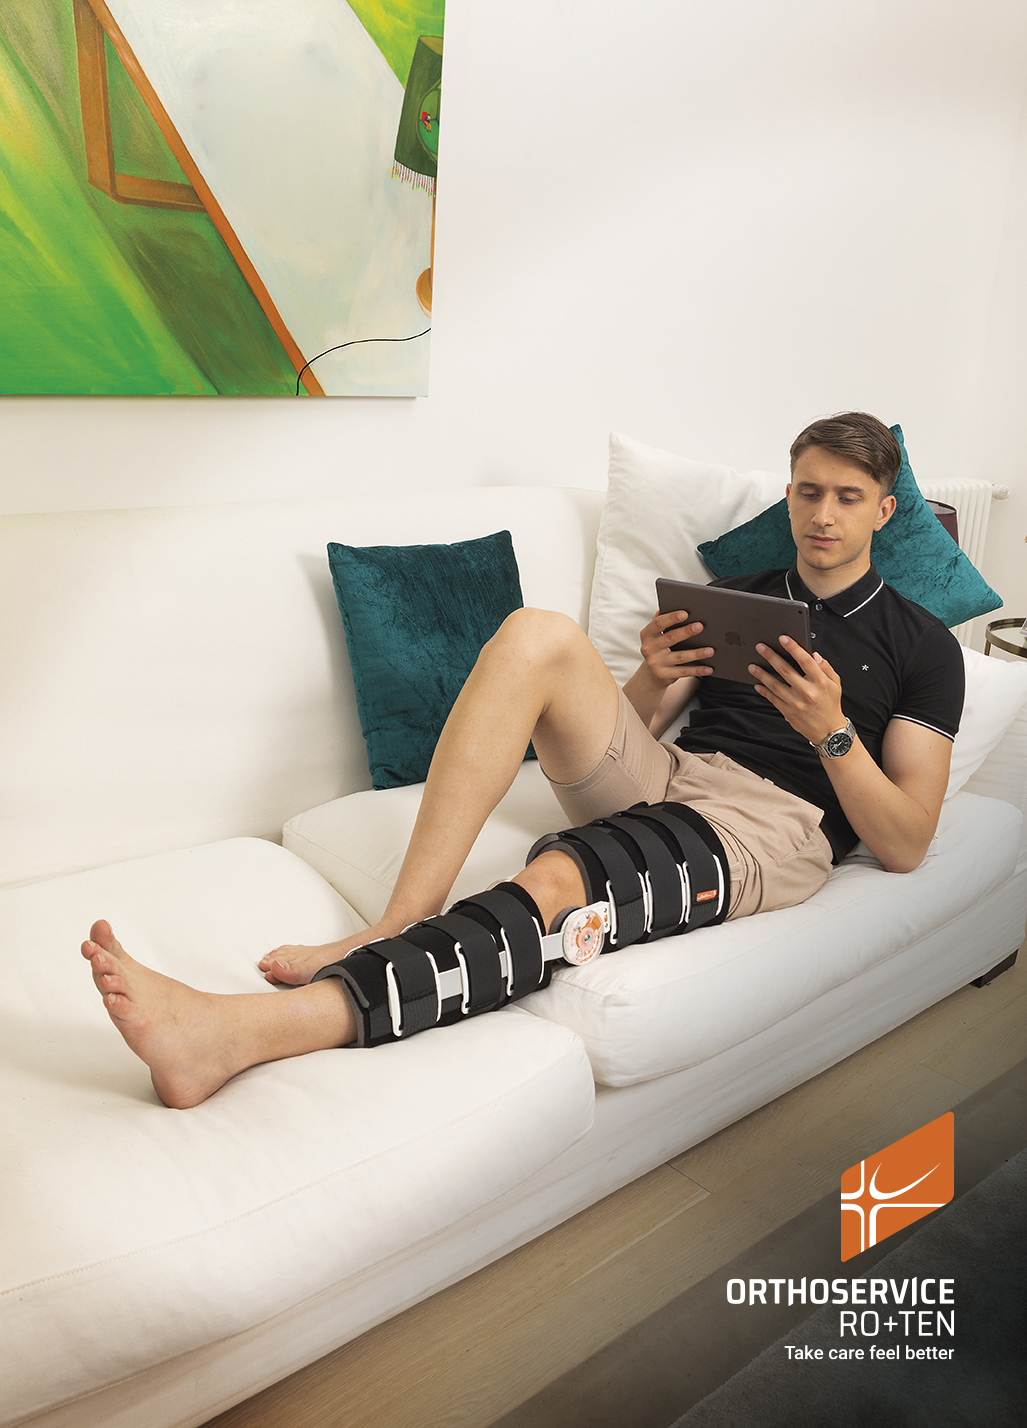 GO UP - Knee orthosis for post-surgery